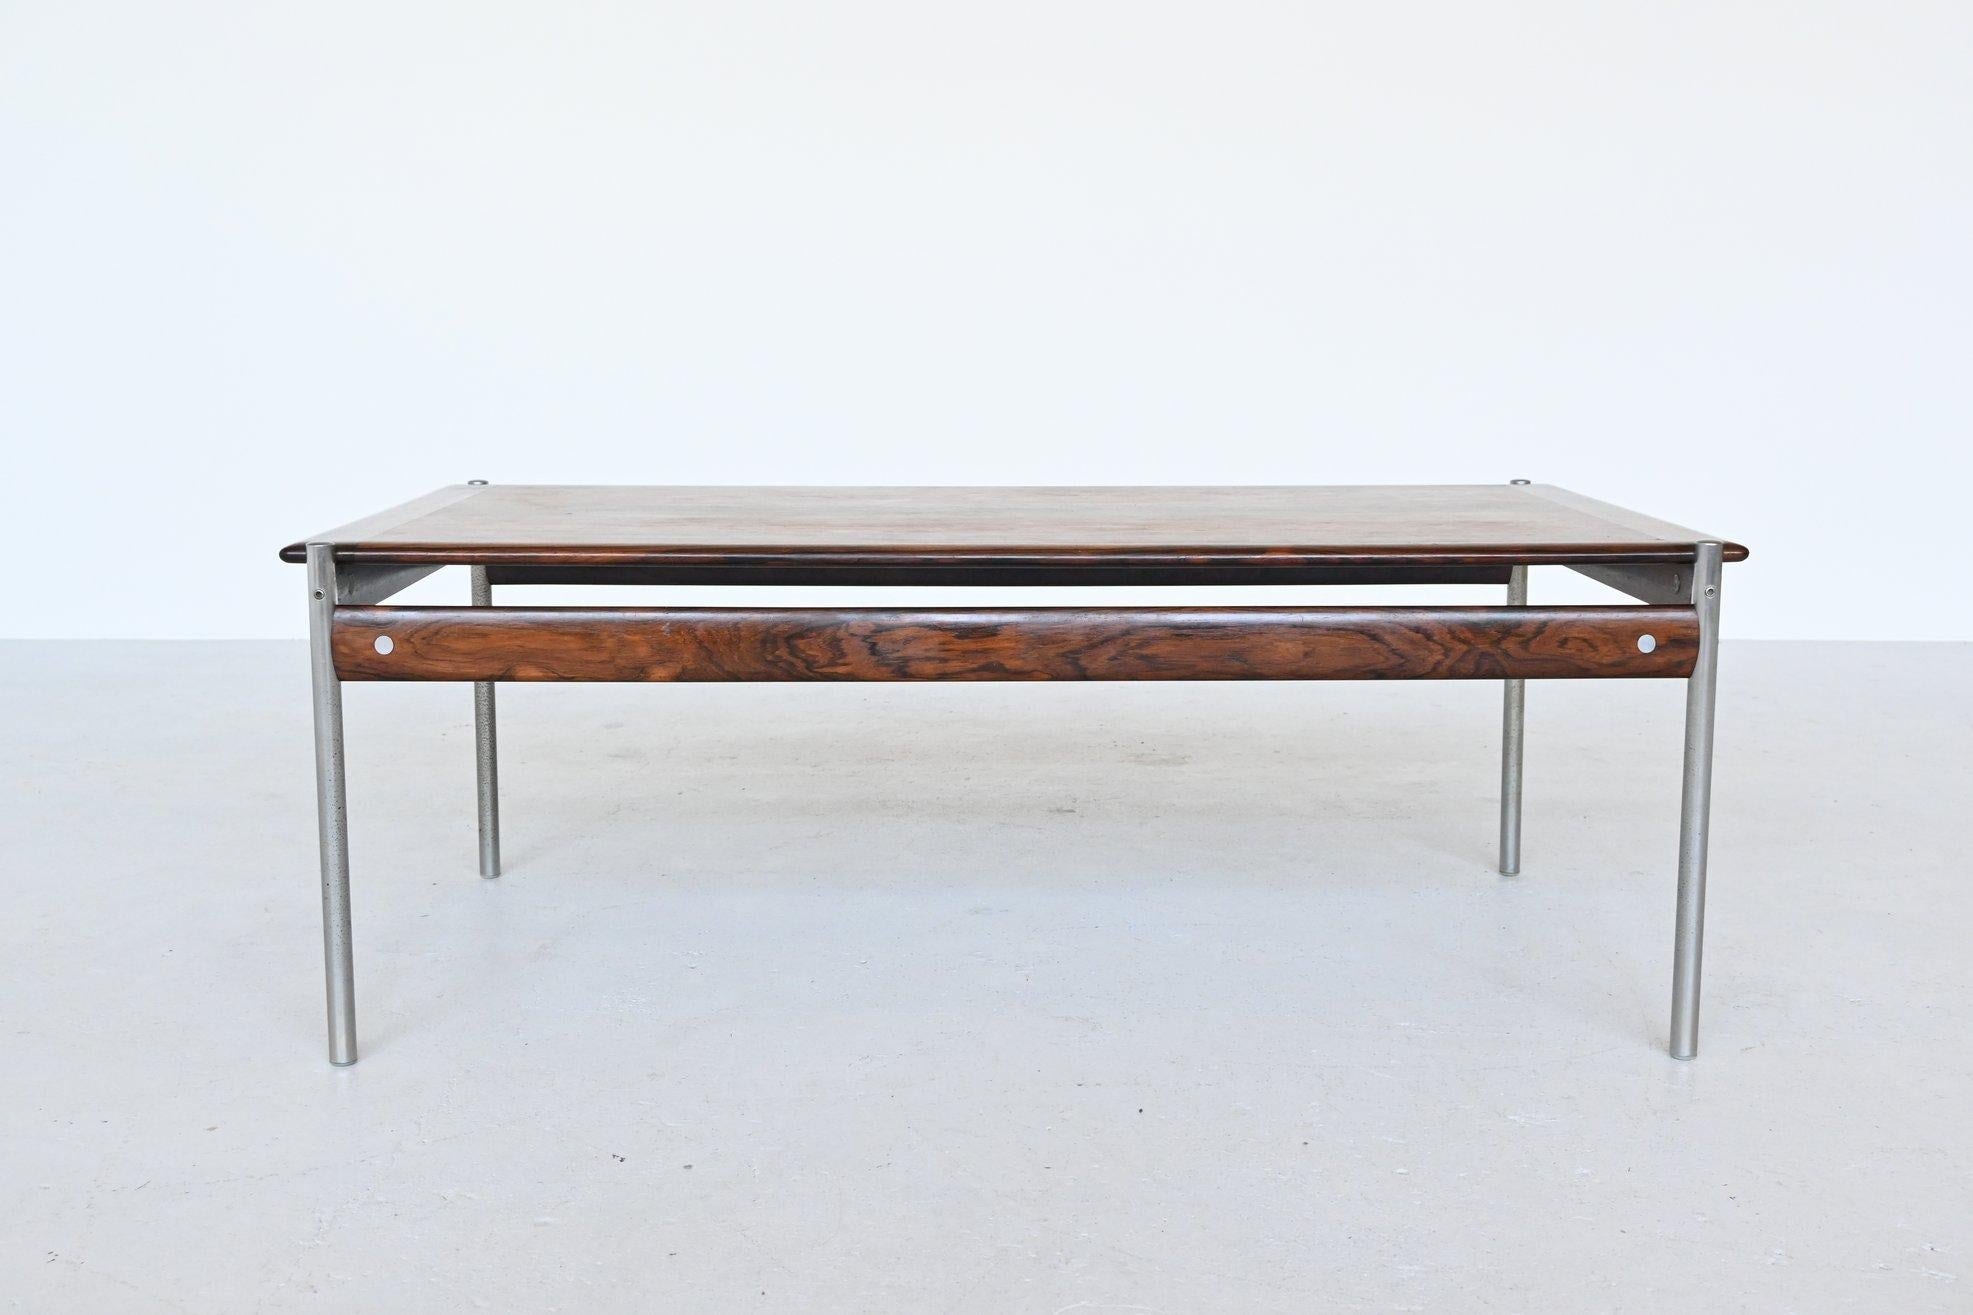 Stunning coffee table from 1001 series designed by Sven Ivar Dysthe for Dokka Mobler, Norway, 1957. This beautiful coffee table is executed in high quality beautiful grained rosewood and tubular steel legs. All parts are of a distinctly high quality